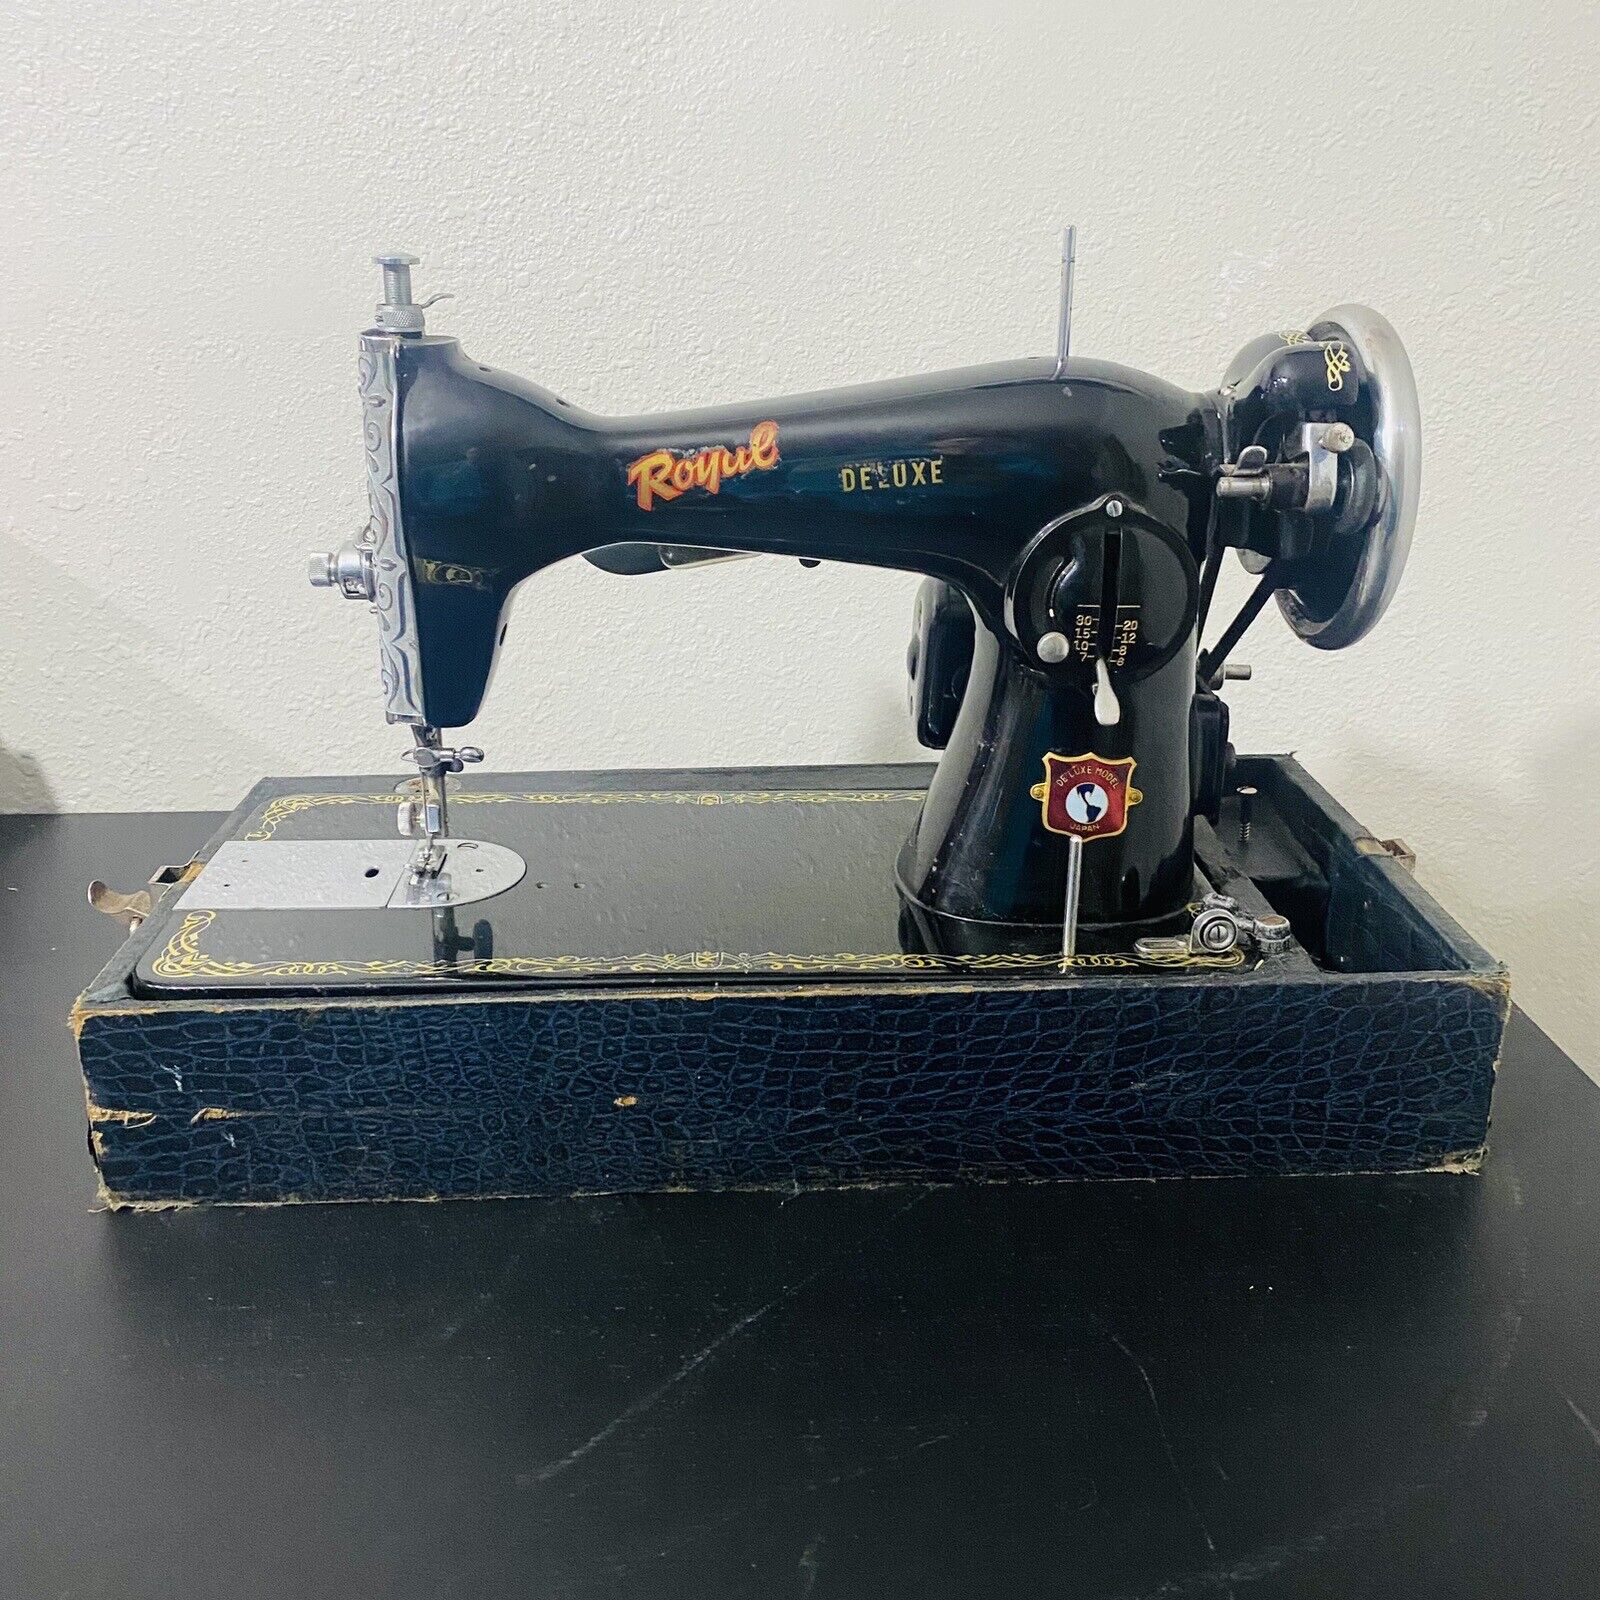 Royal Deluxe Sewing Machine Made In Japan Vintage Antique Black Untested W/ Case